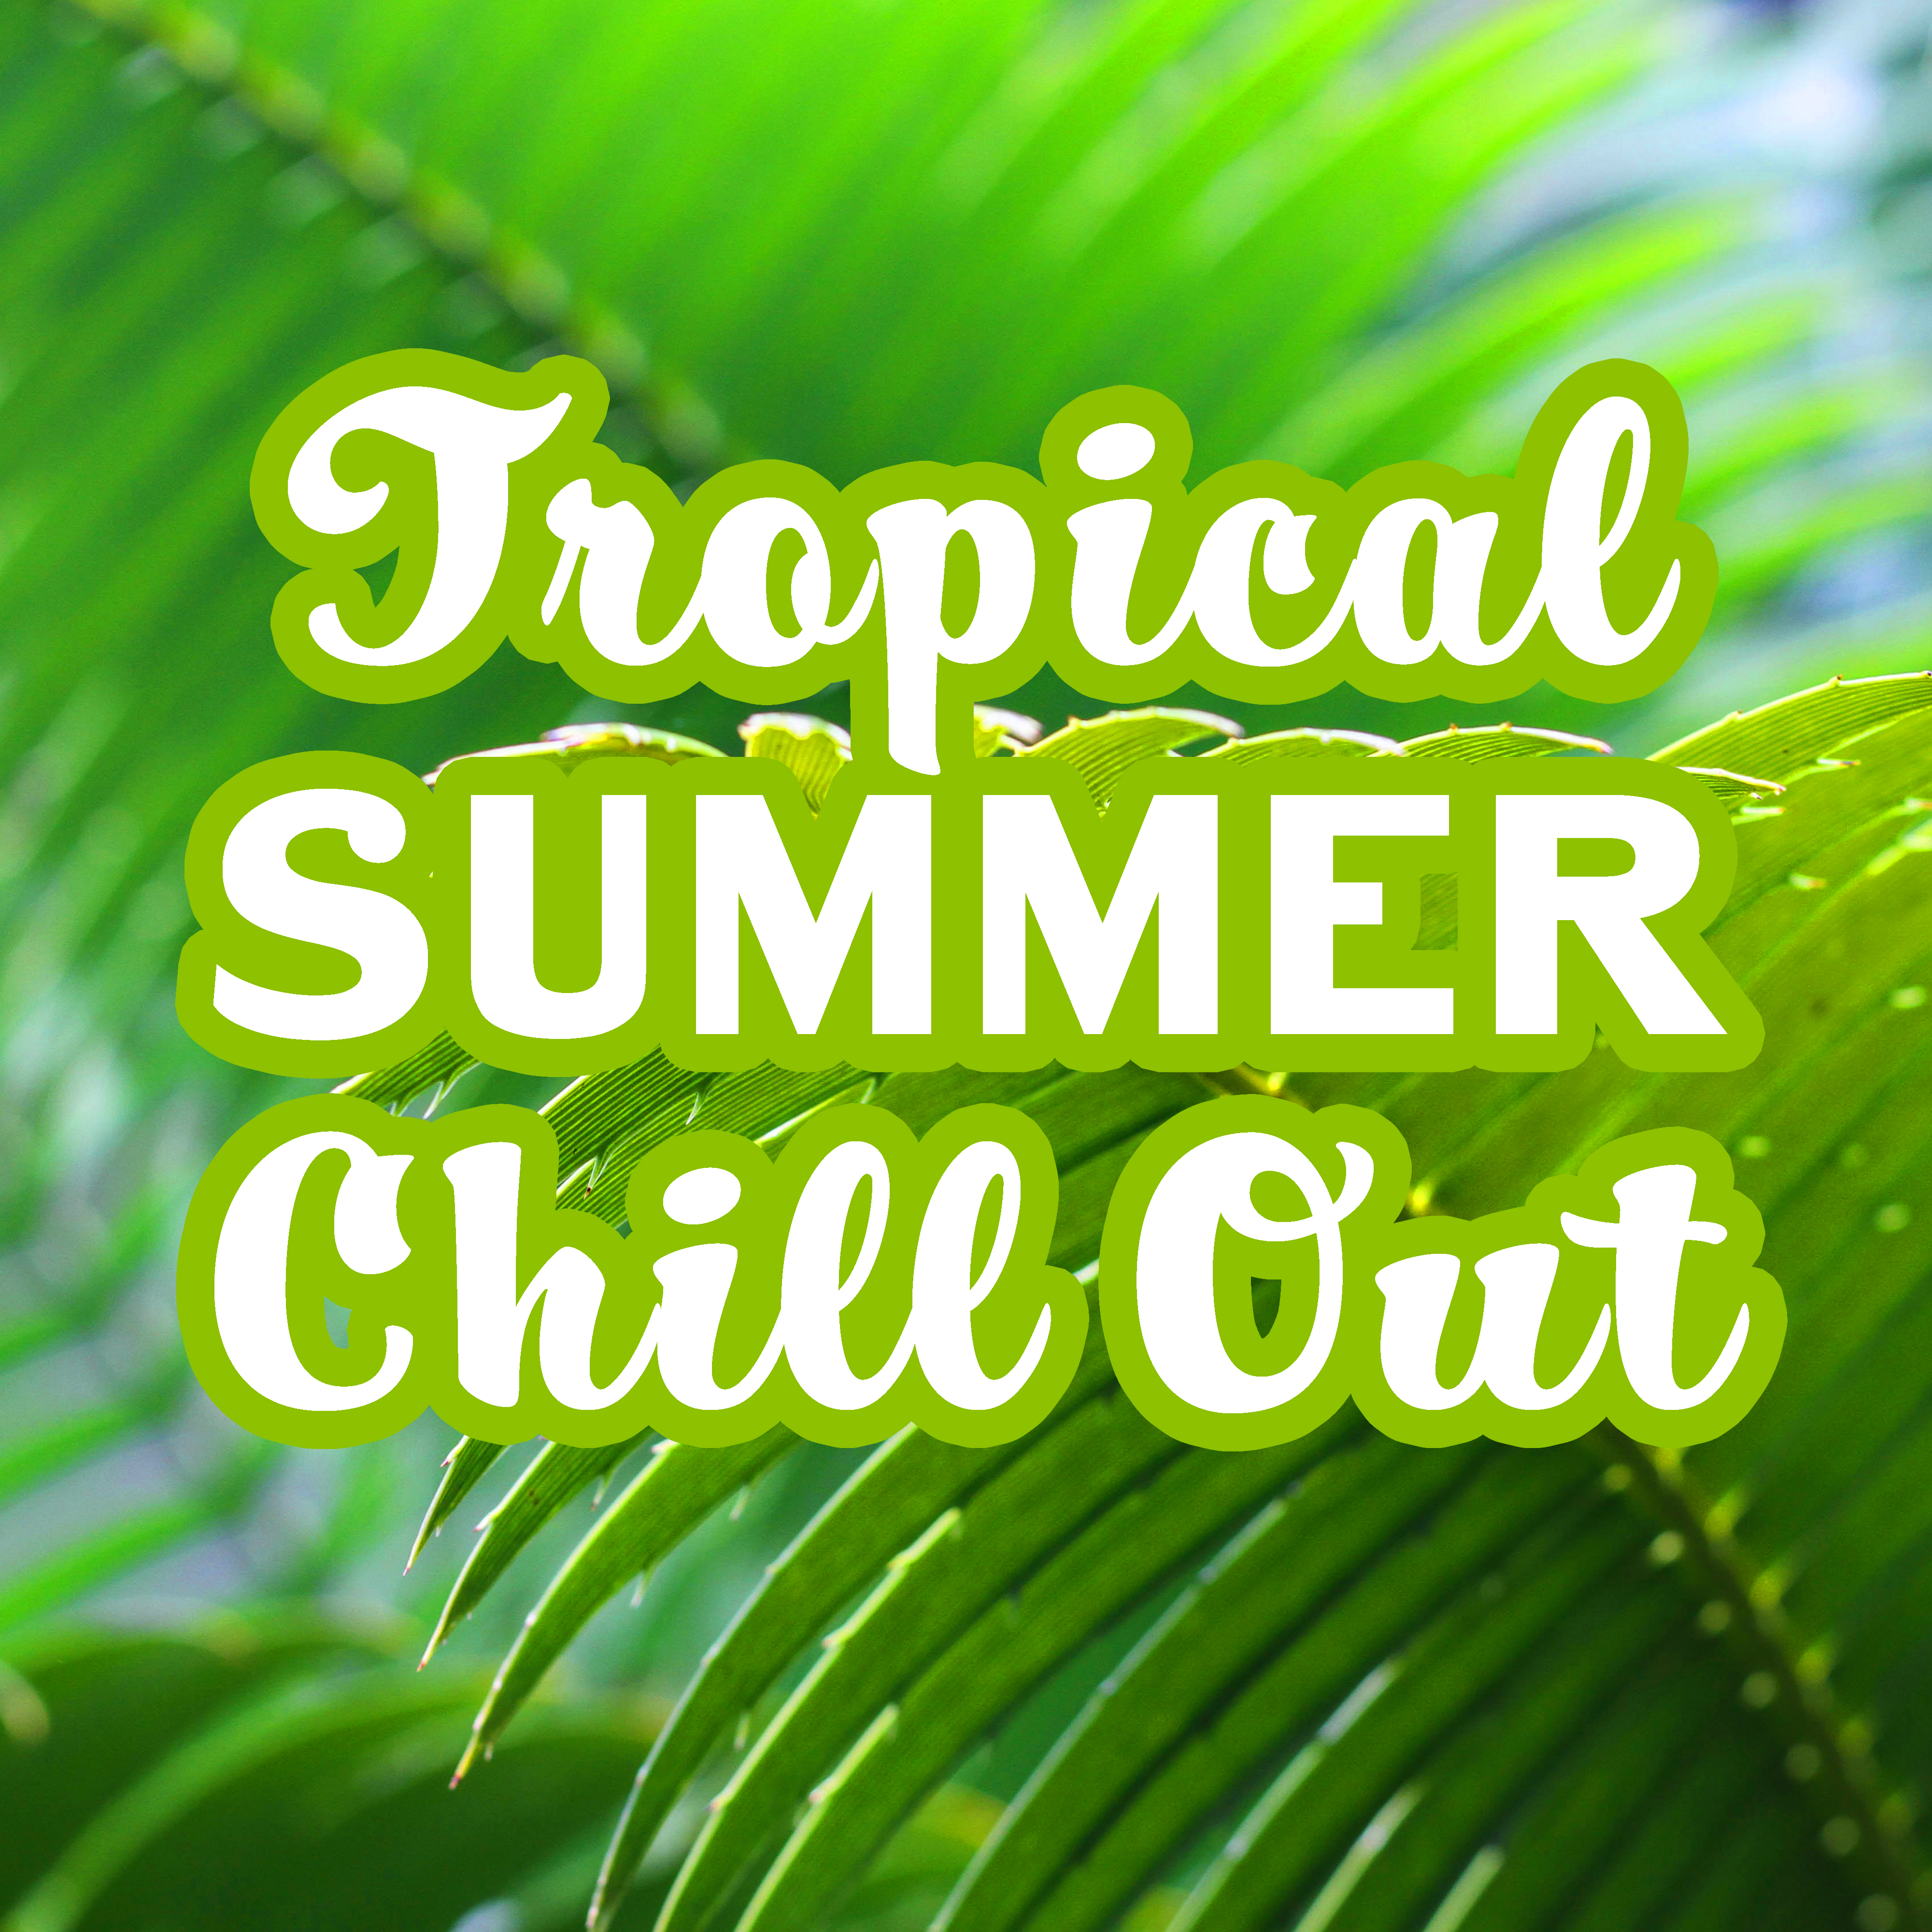 Tropical Summer Chill Out  Soft Music to Relax, Chill Out Journey, Holiday Vibes, Stress Relief